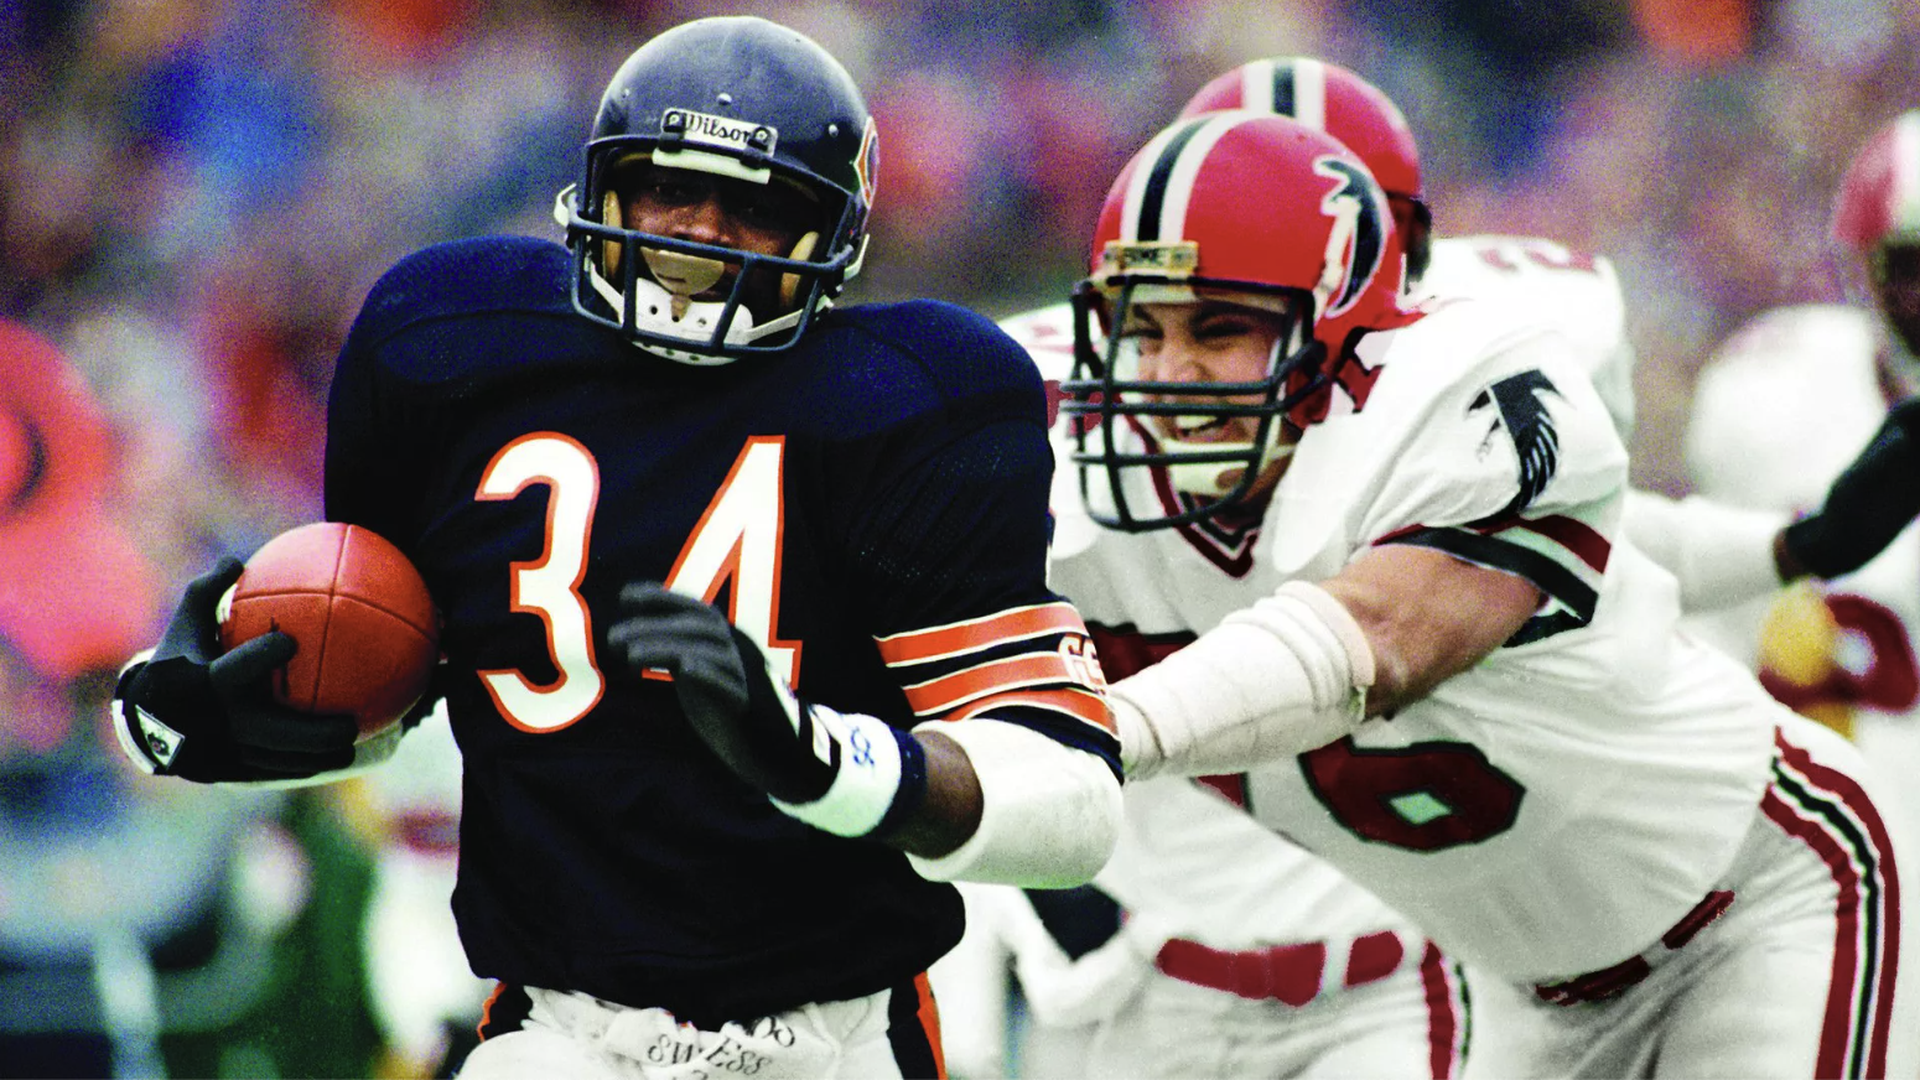 Remember when the Bears dominated the Falcons in 1985? We do. Photo: Charles Cherney/Chicago Tribune/Tribune News Service via Getty Images